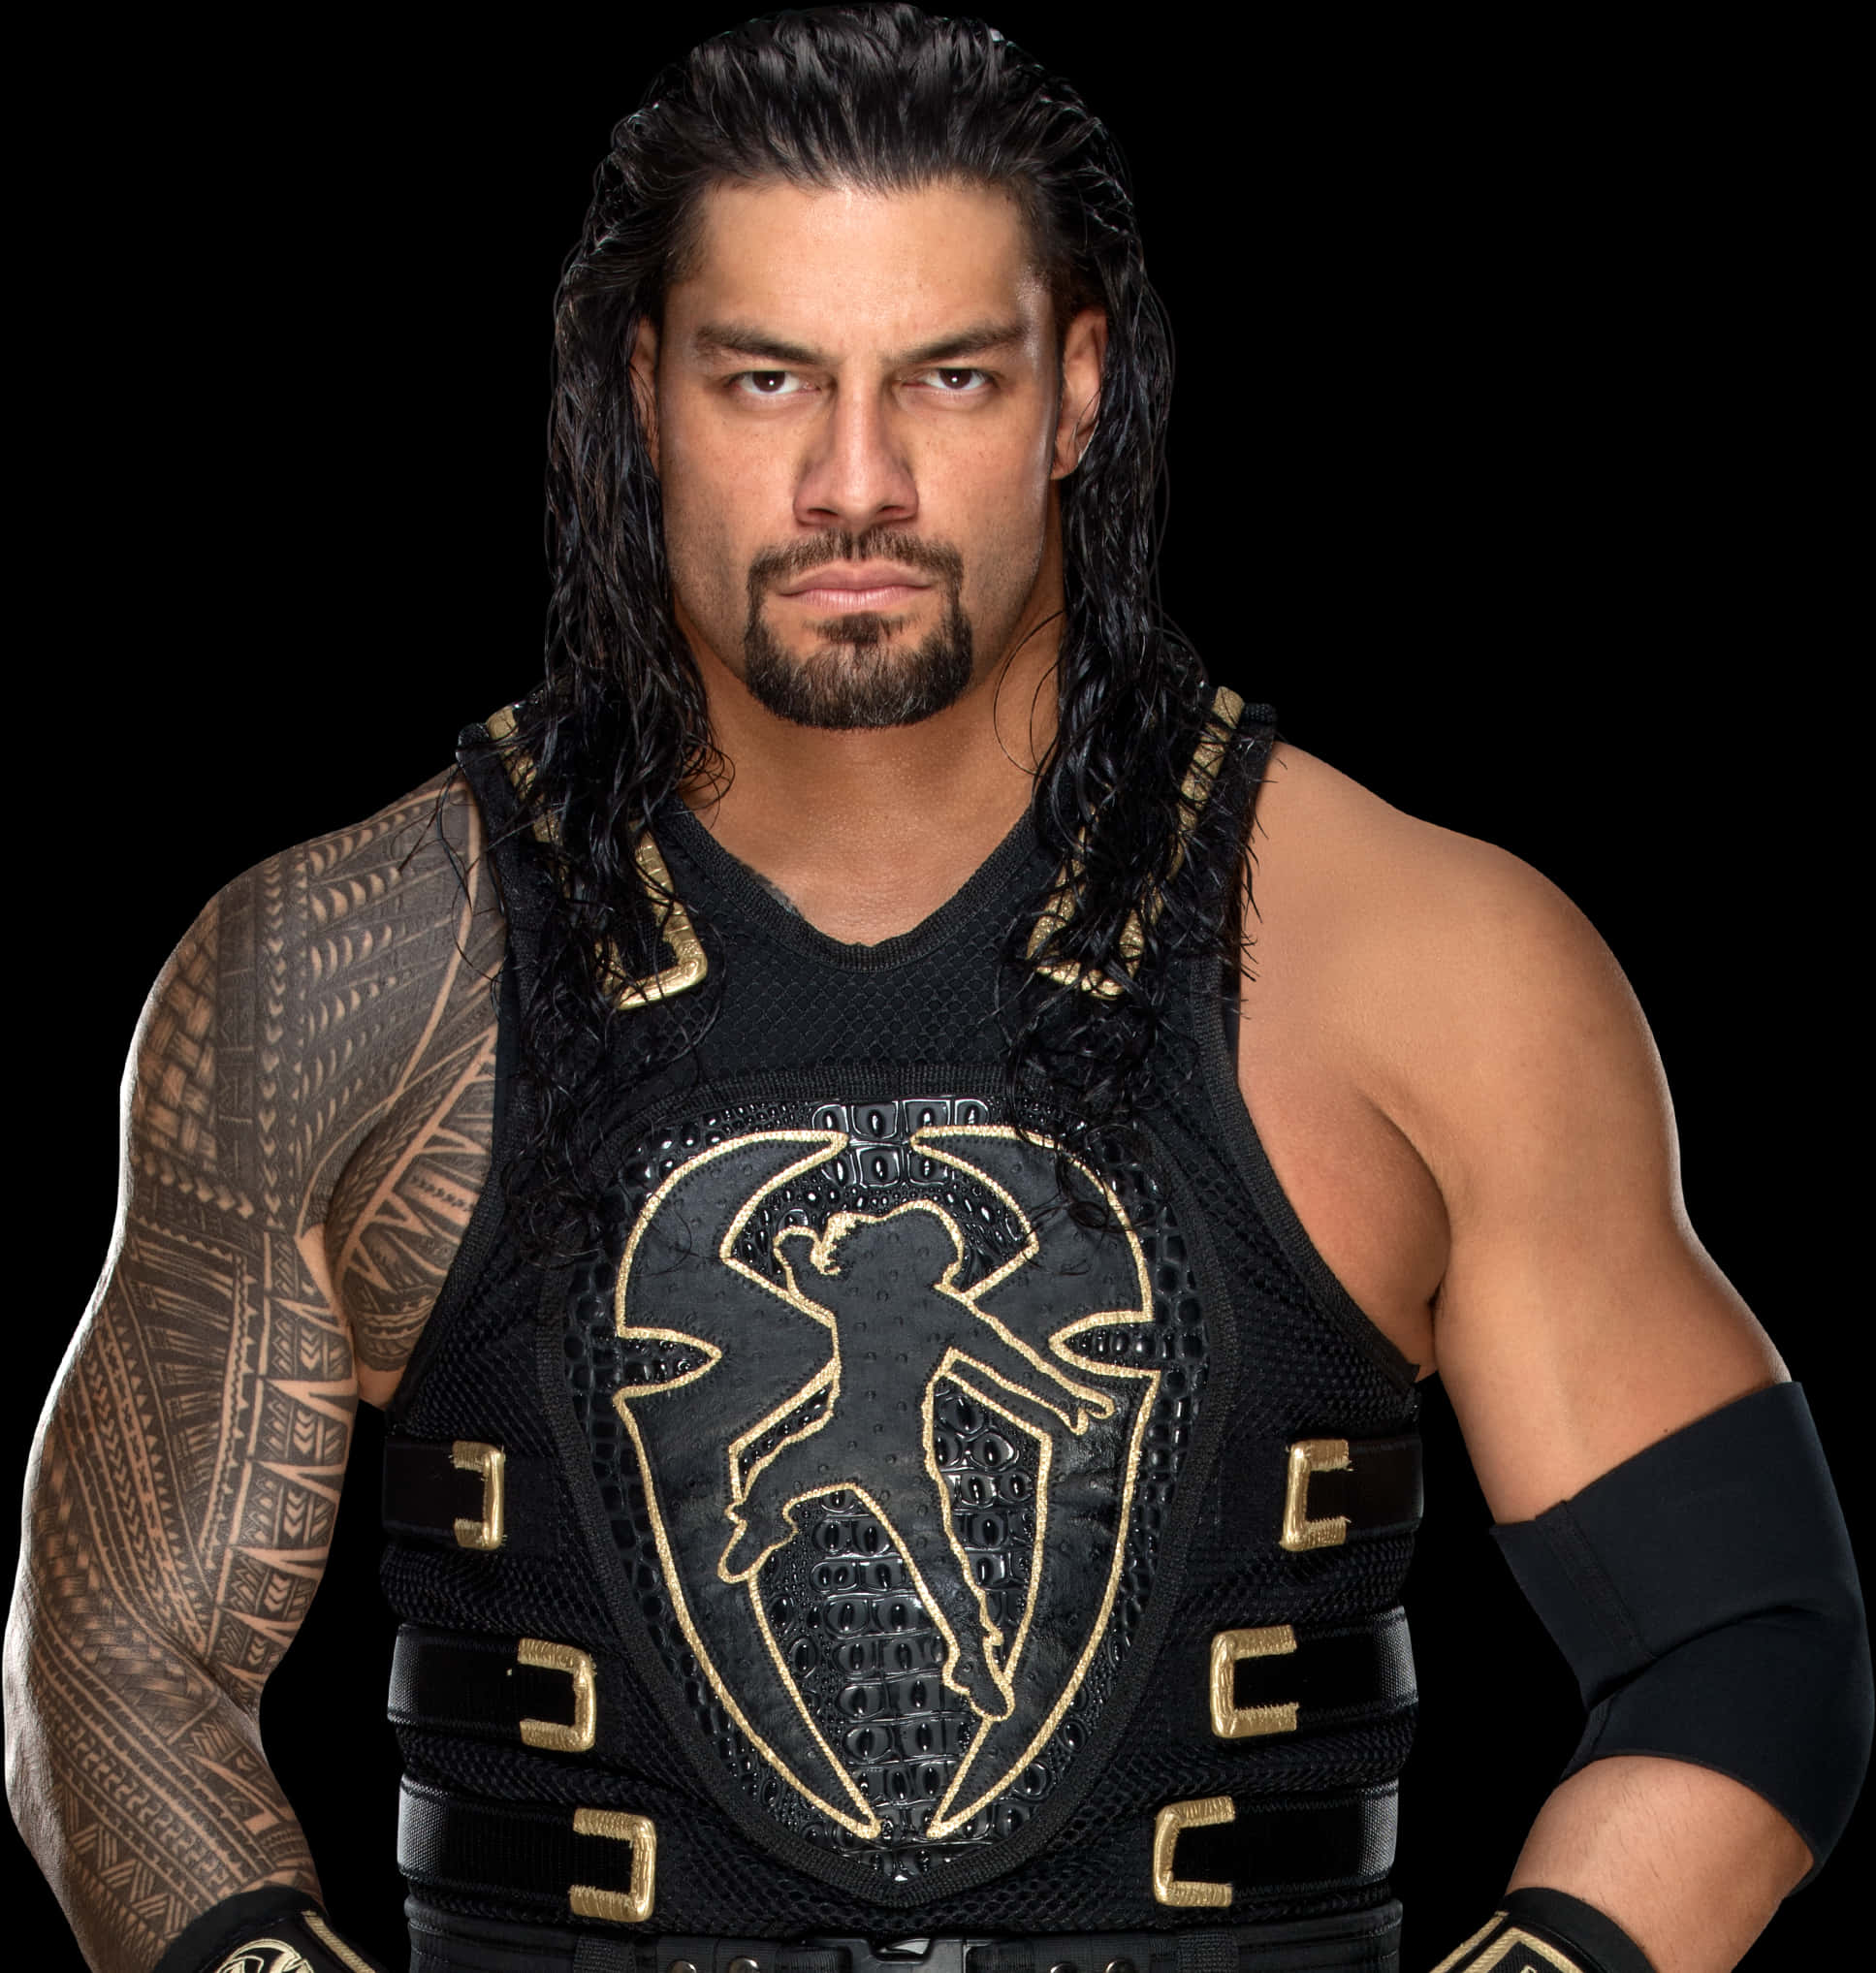 Roman Reigns Wearing Black Outfit